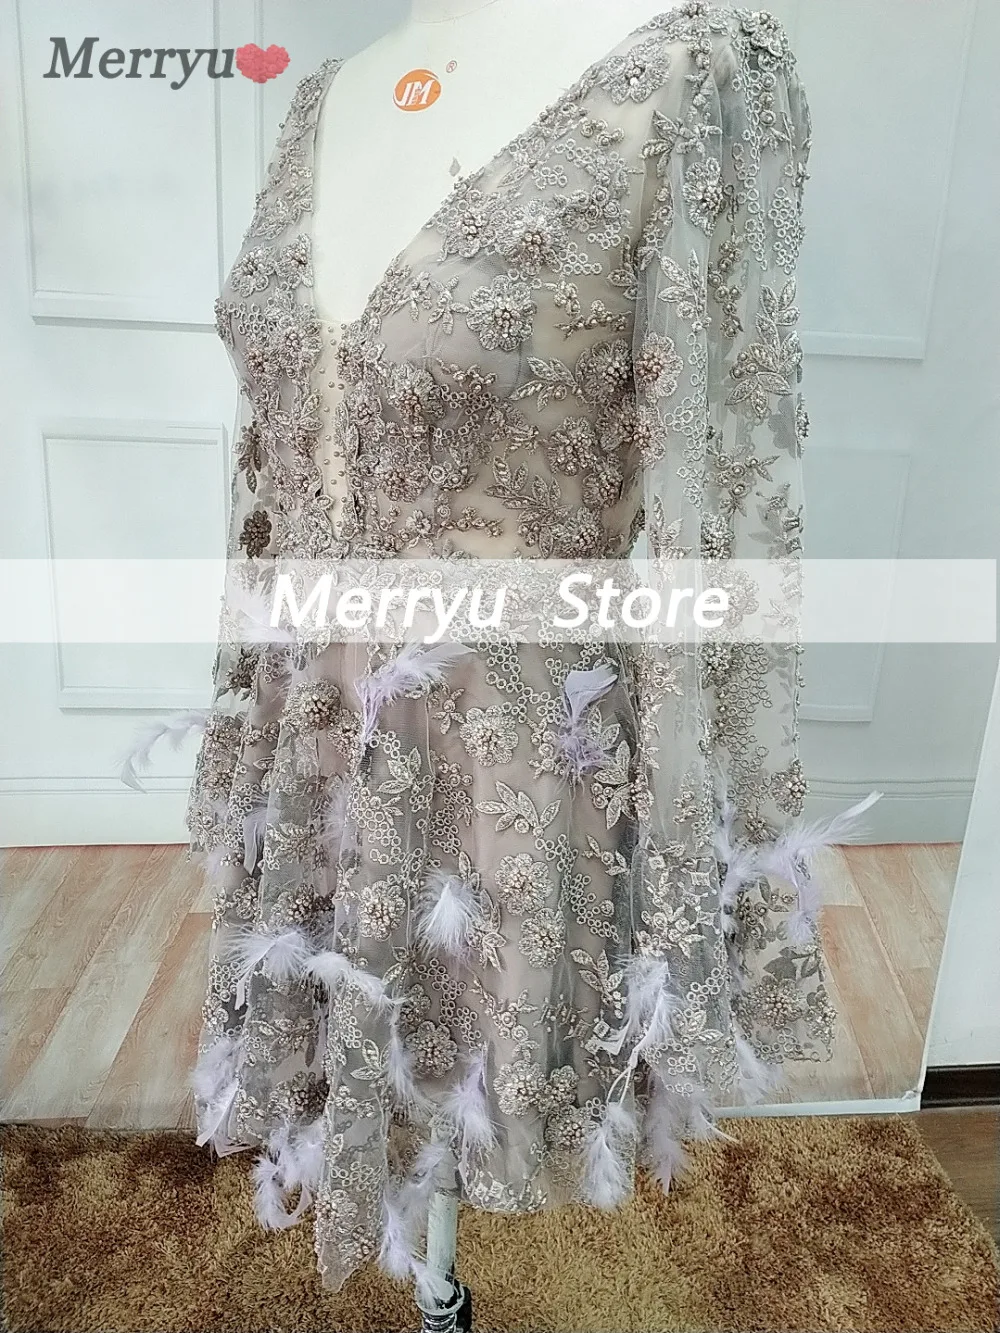 long sleeve prom dresses Long Sleeve 2020 Cocktail Dresses Sexy Short Deep V Neck Flowers Beads Prom Dress See Through Crystal Mini Evening Gowns mini prom & dance dresses